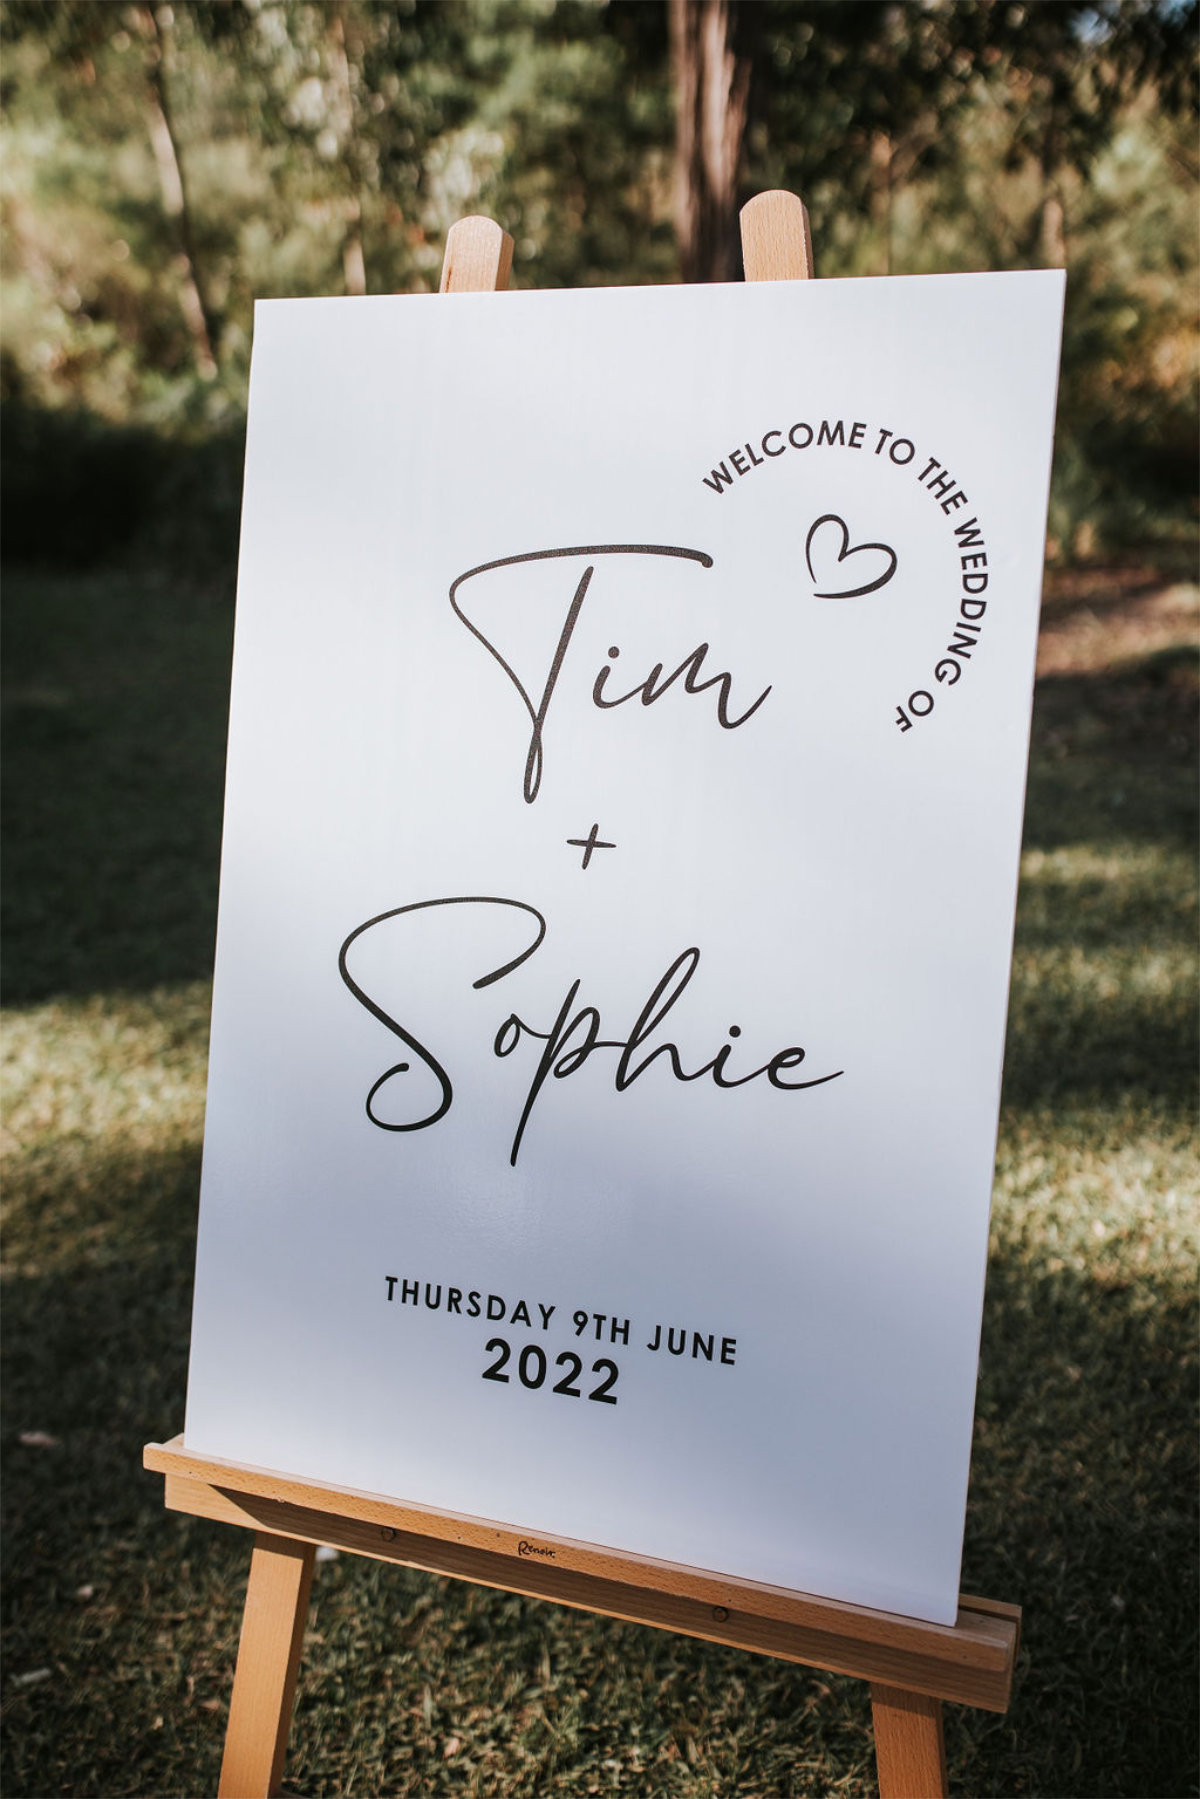 The Woods Farm wedding for Sophie and Tim. Photographed by Neaton Photography.